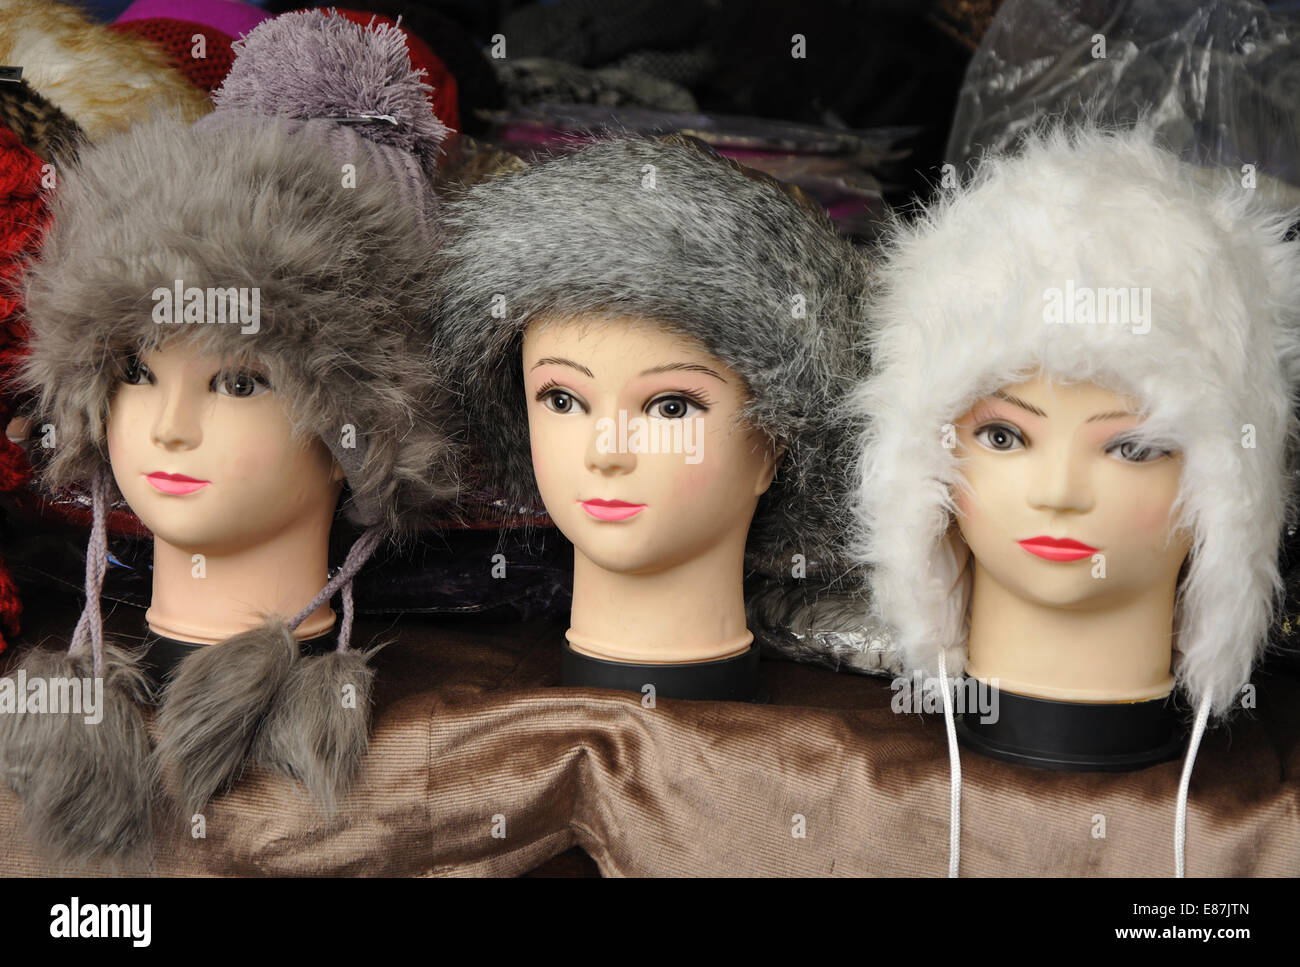 mannequin heads displaying hats for sale, Leicester Market, Leicester, England, UK Stock Photo